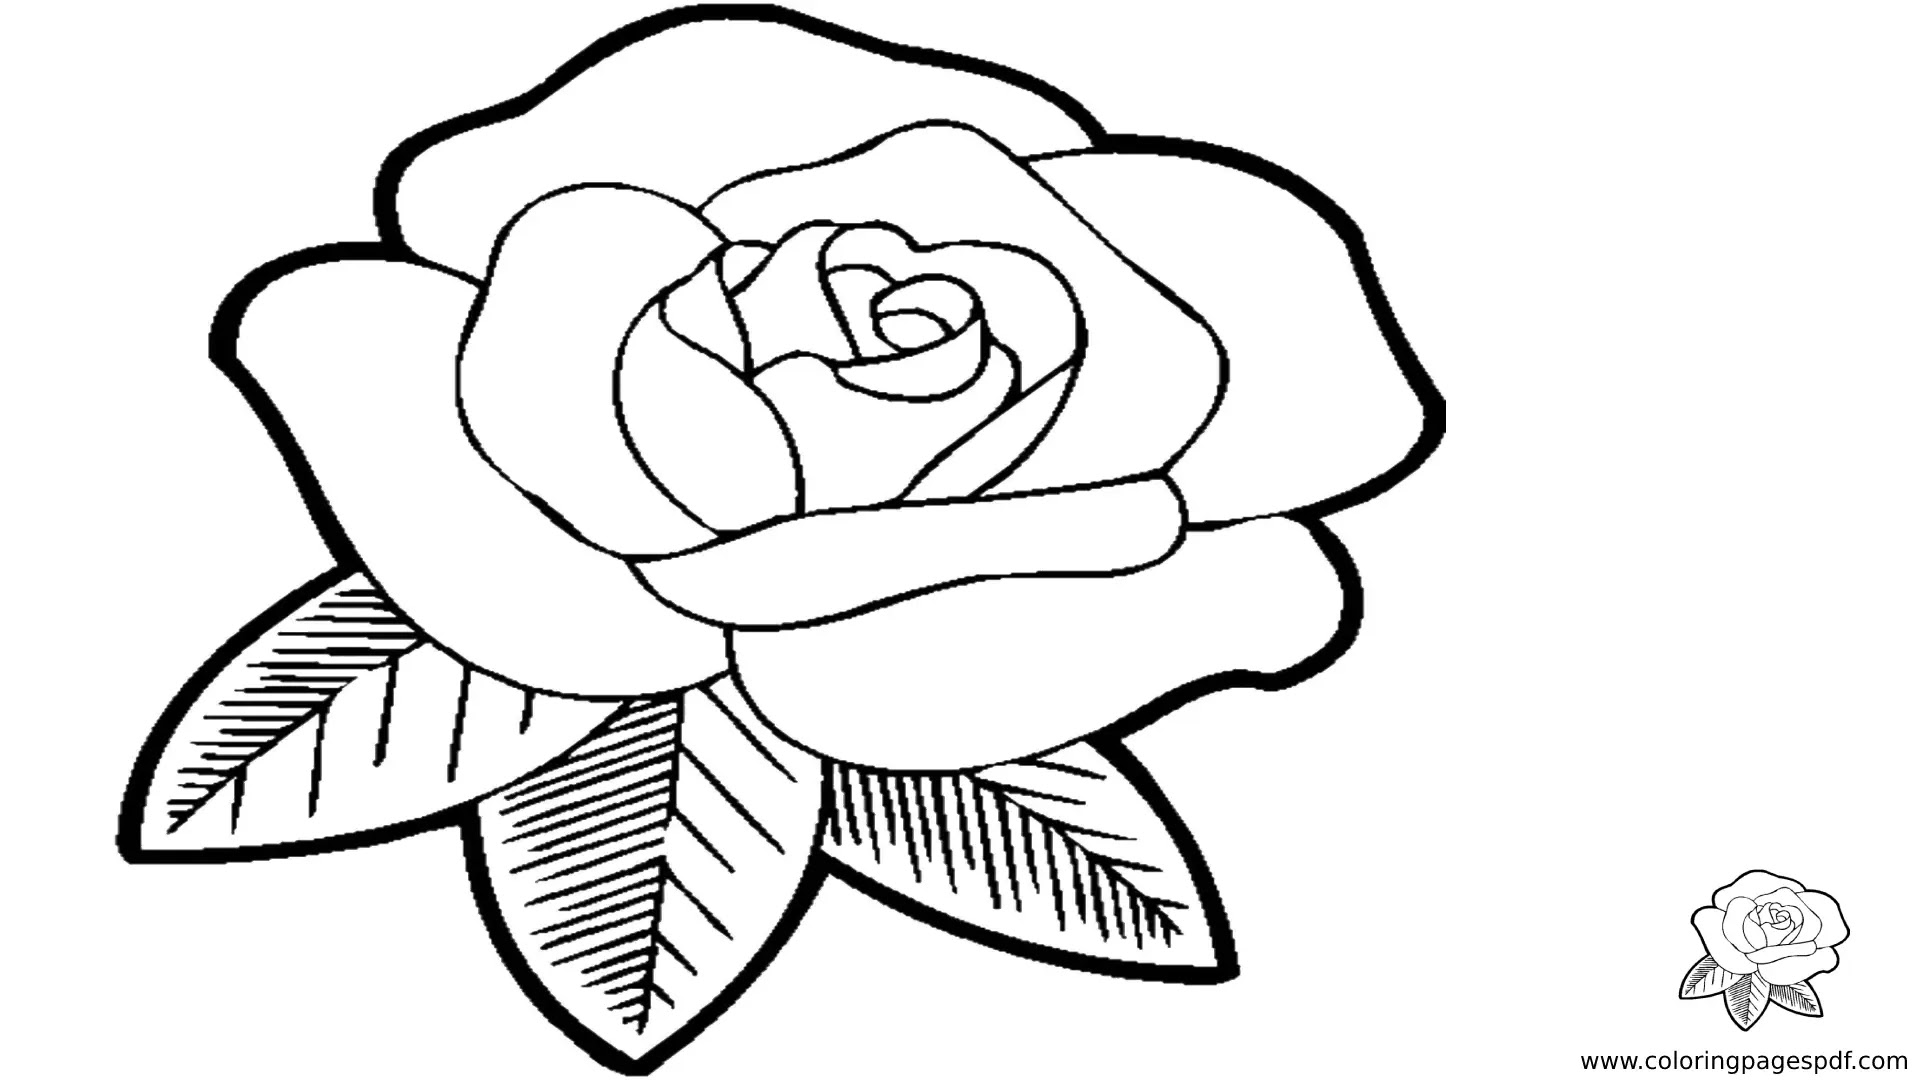 Coloring Pages Of A Simple Rose